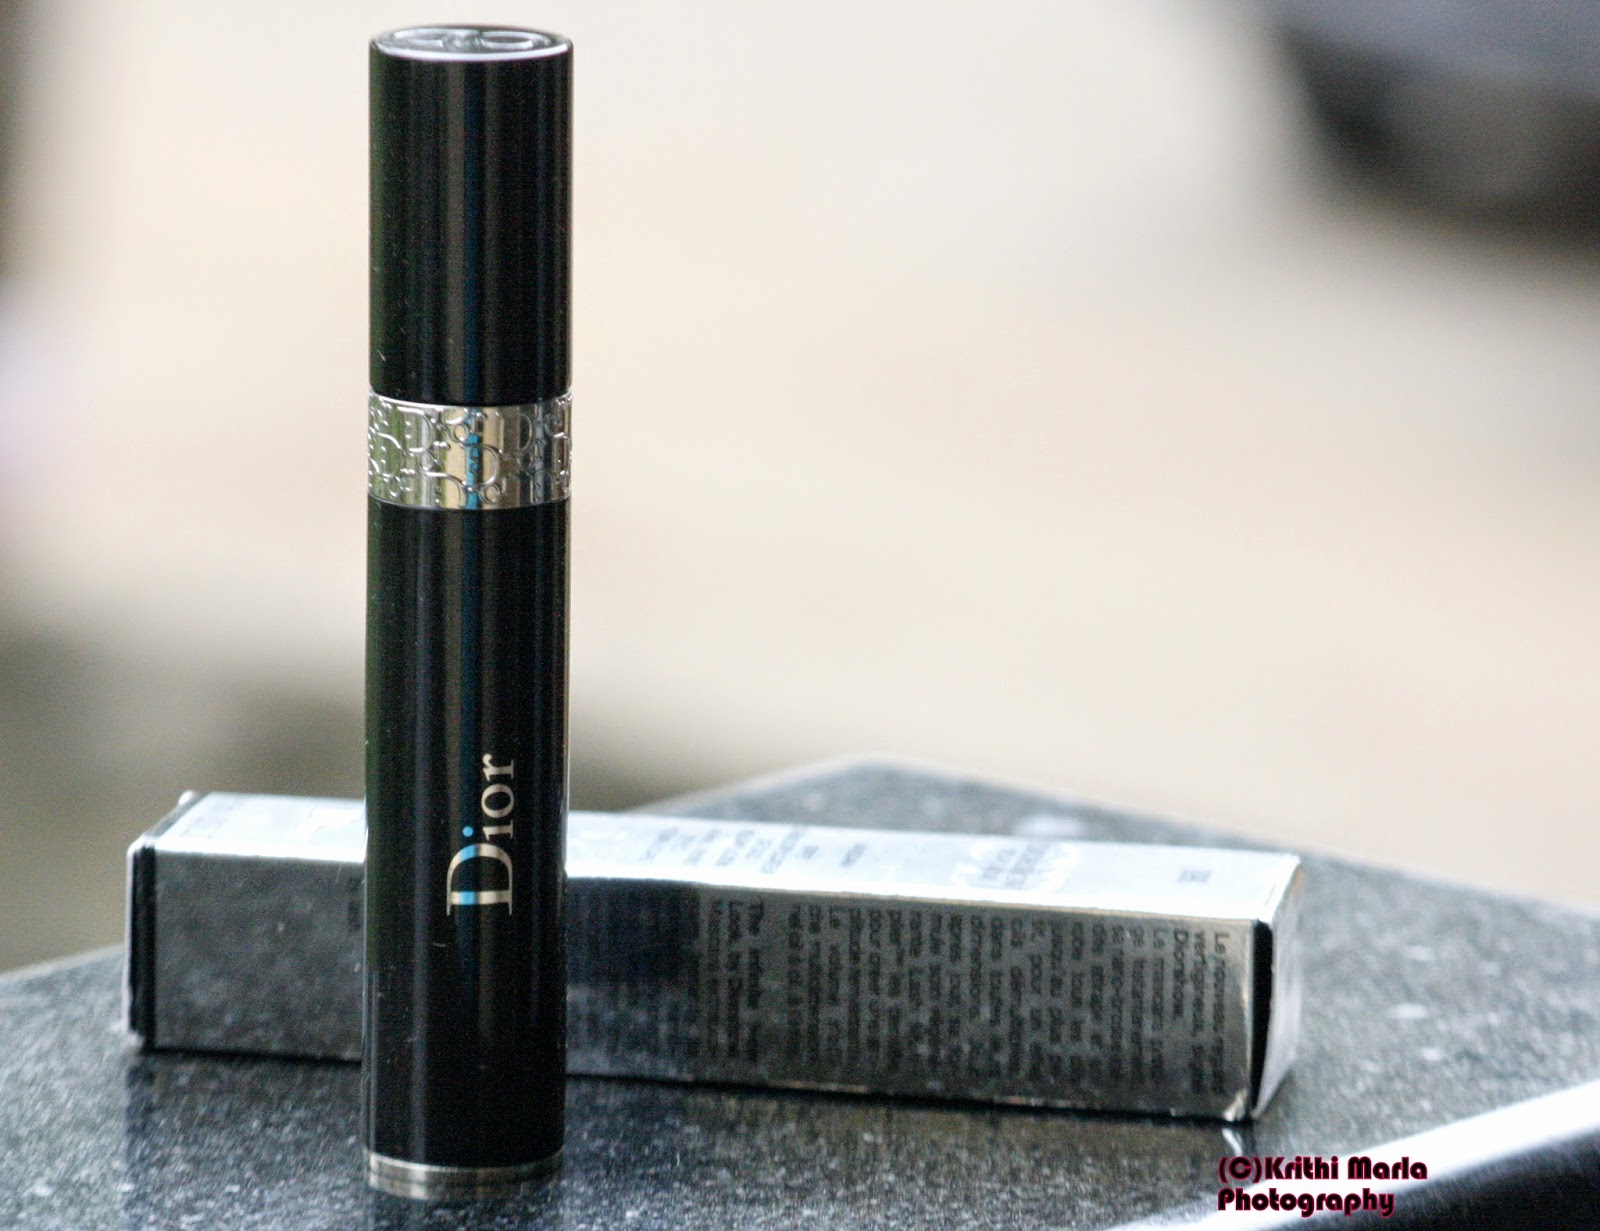 diorshow new look mascara review